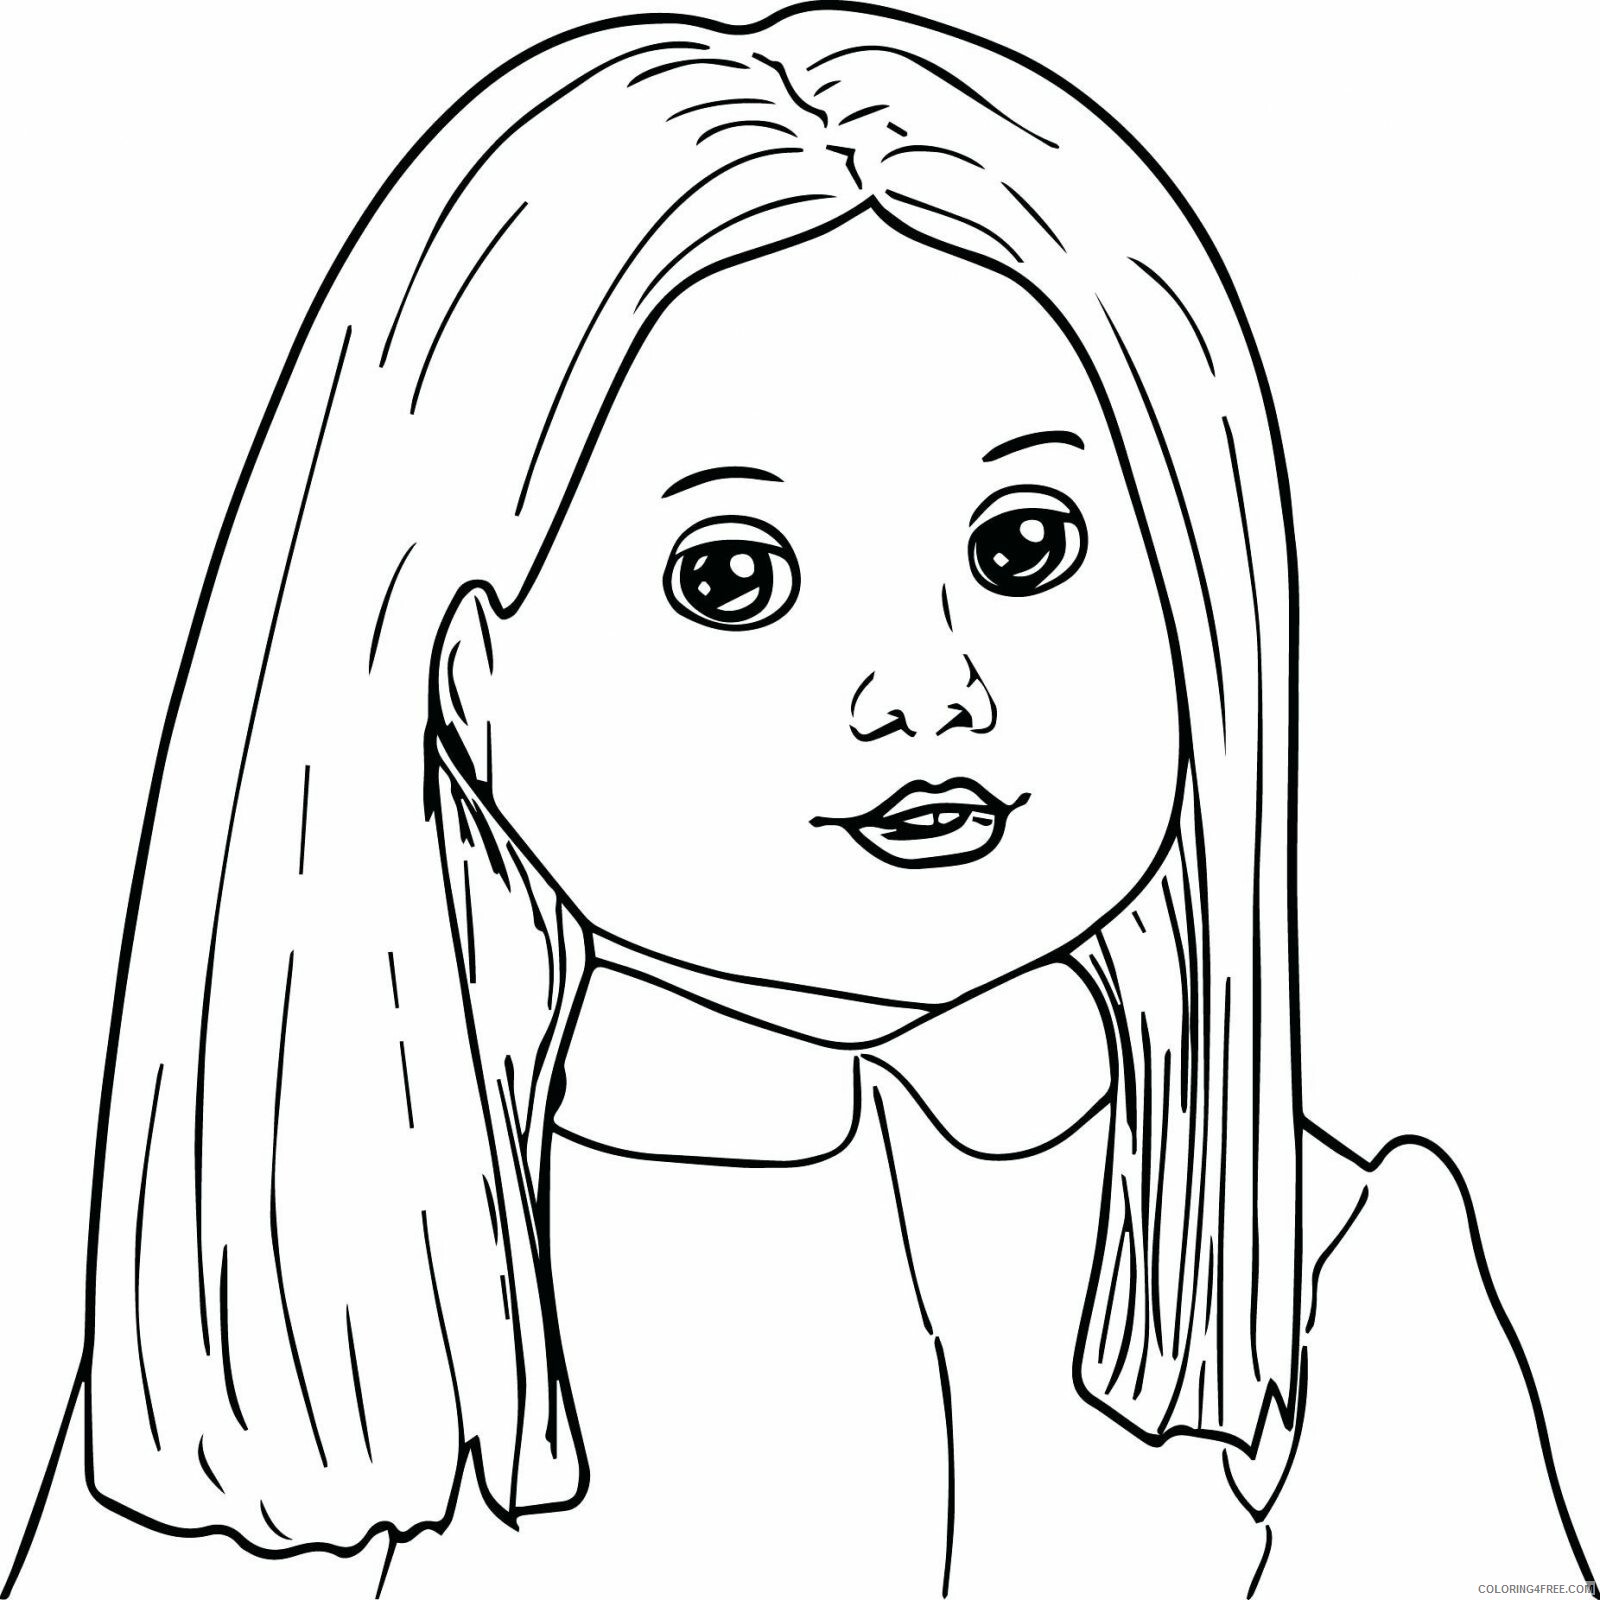 American Girl Doll Coloring Pages for Girls American Girl Doll 1 2 Printable 2021 0003 Coloring4free